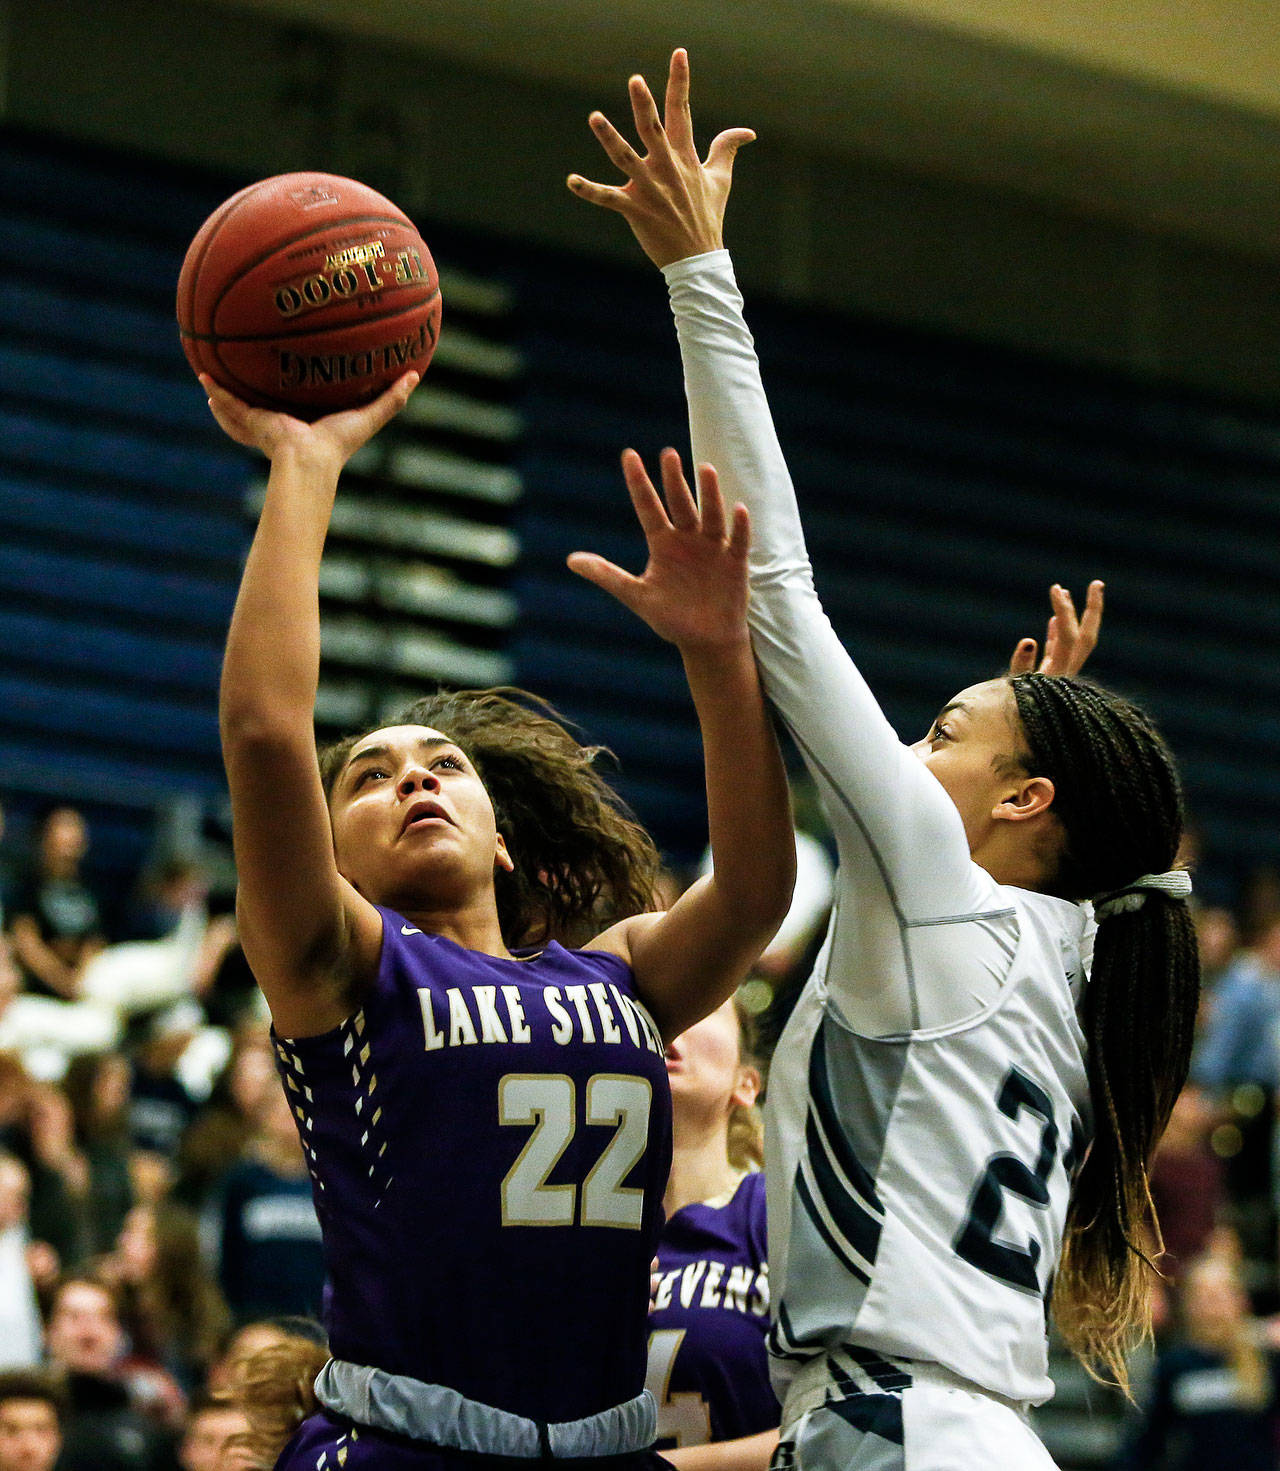 Lake Stevens’ Raigan Reed (left) goes up for a shot as Glacier Peak’s Alexyss Newman (right) defends during a game at Glacier Peak High School in Snohomish on Friday, Jan. 19, 2018. Reed, a junior, has given her verbal commitment to join the Boise State University women’s basketball team. (Ian Terry / The Herald)